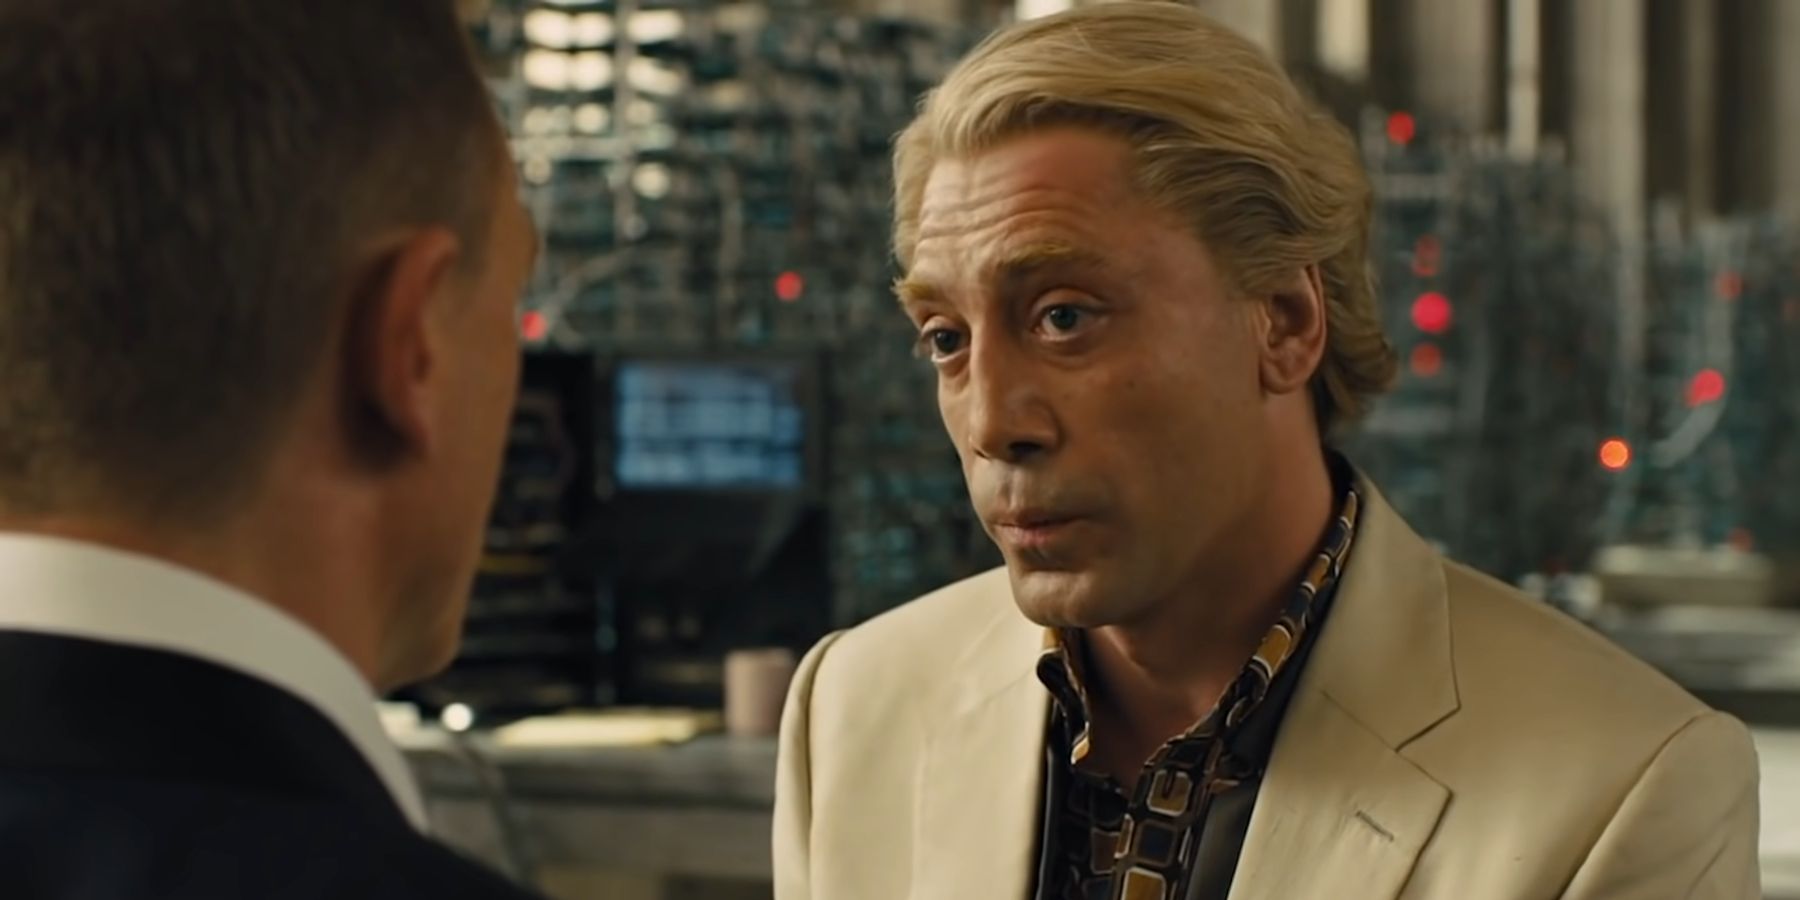 Silva speaking with James Bond in his lair in Skyfall